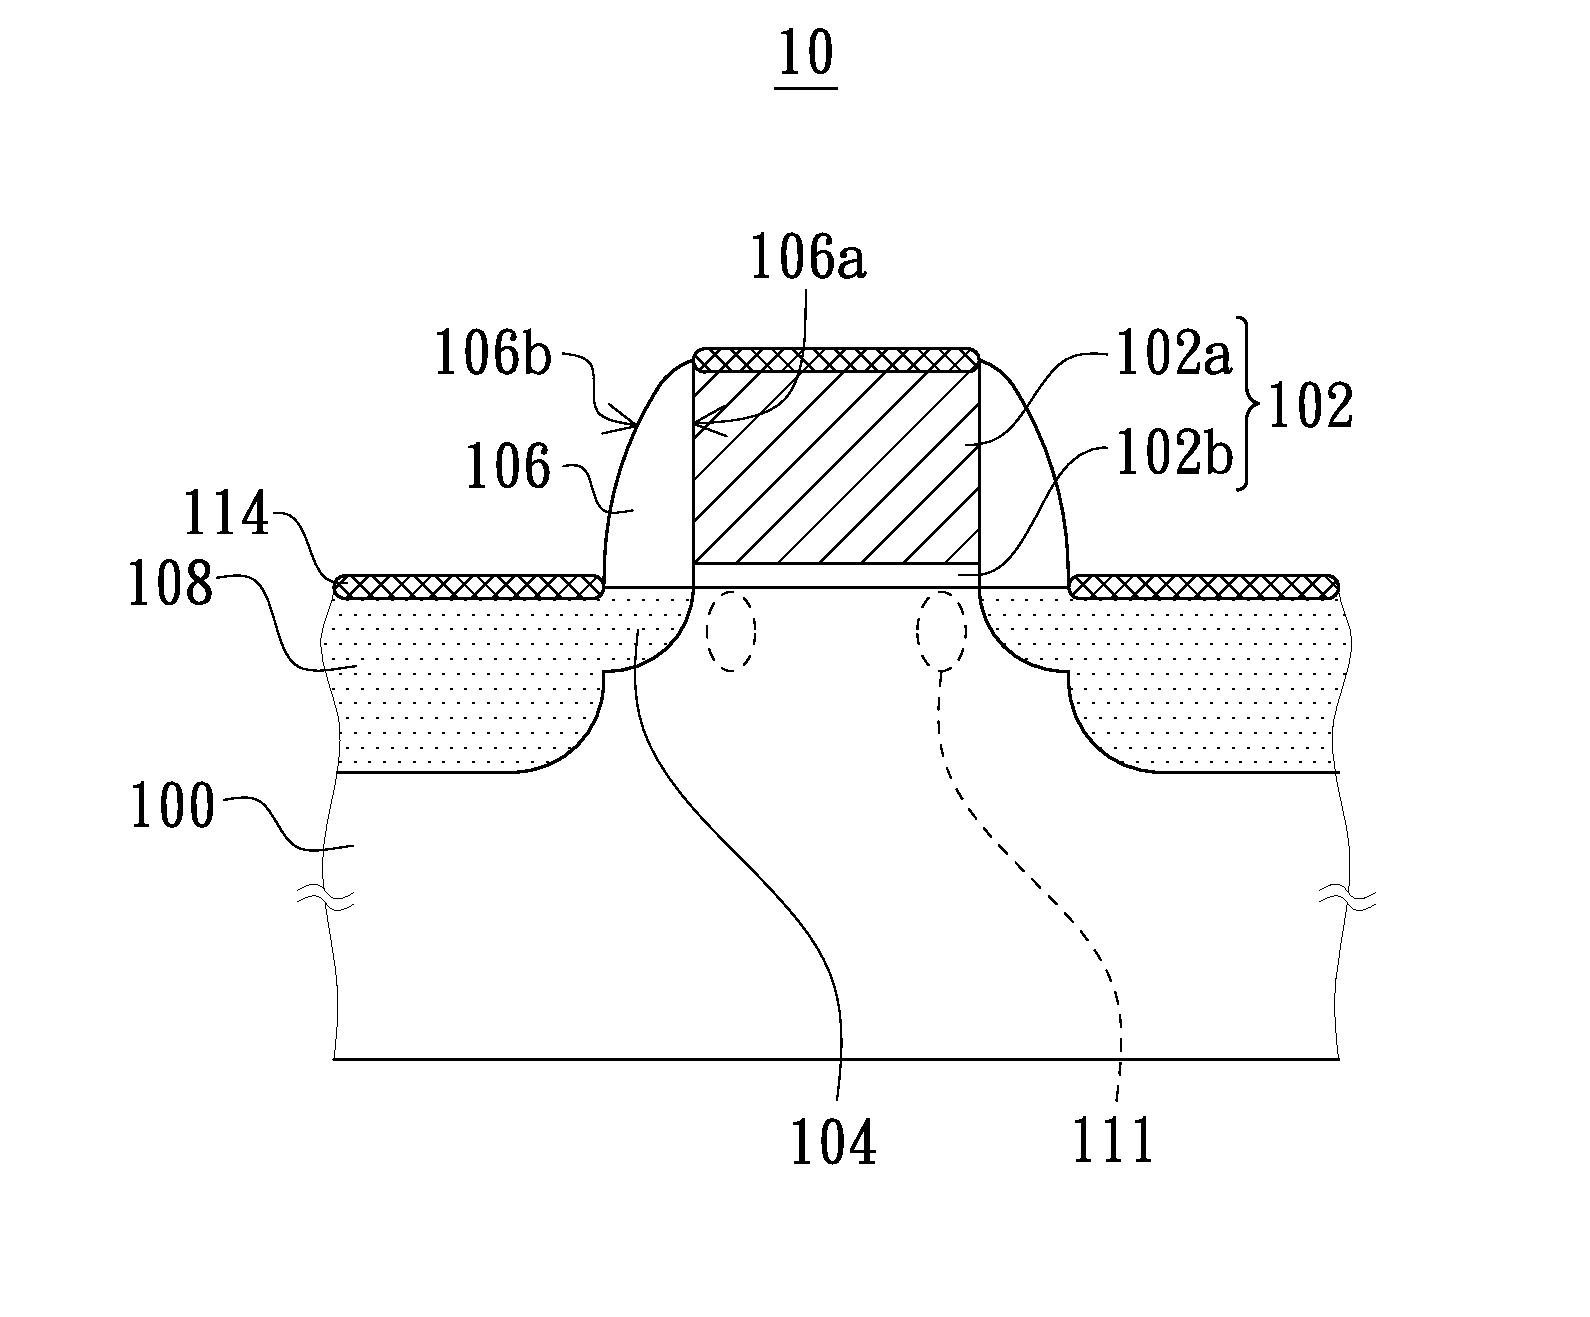 Semiconductor device with carbon atoms implanted under gate structure